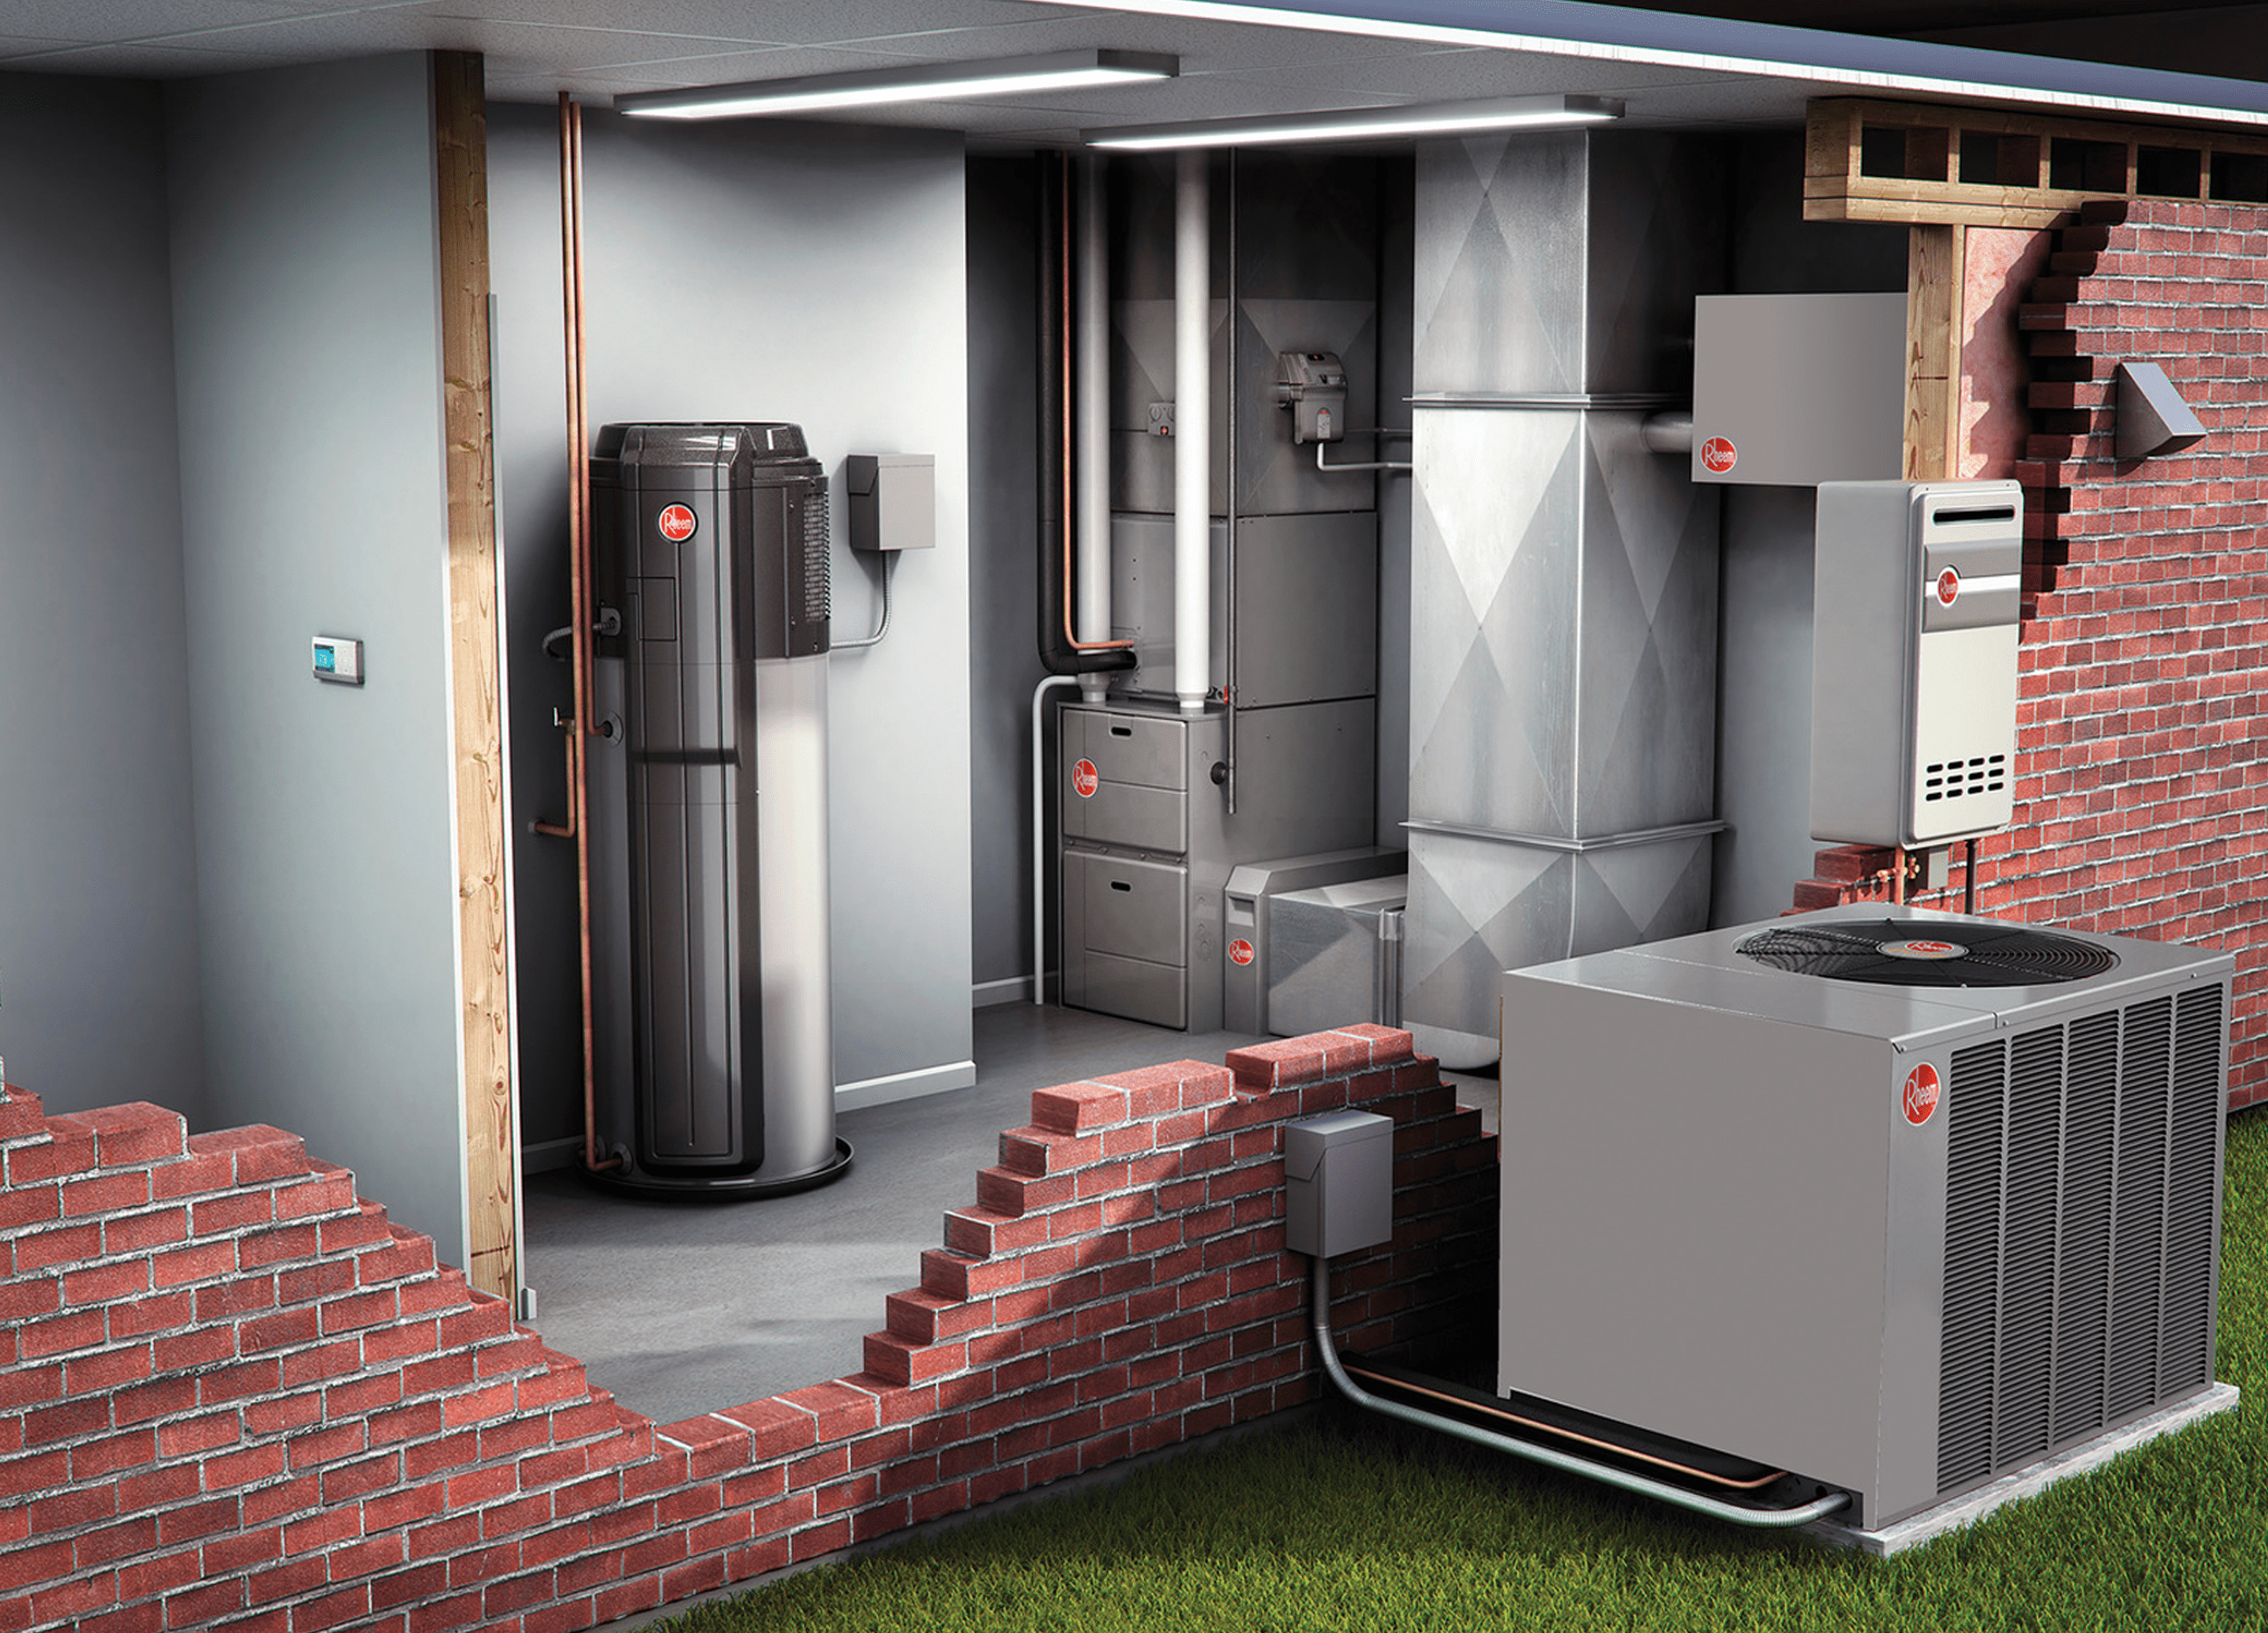 Rheem Furnace service in Sussex WI is our speciality.